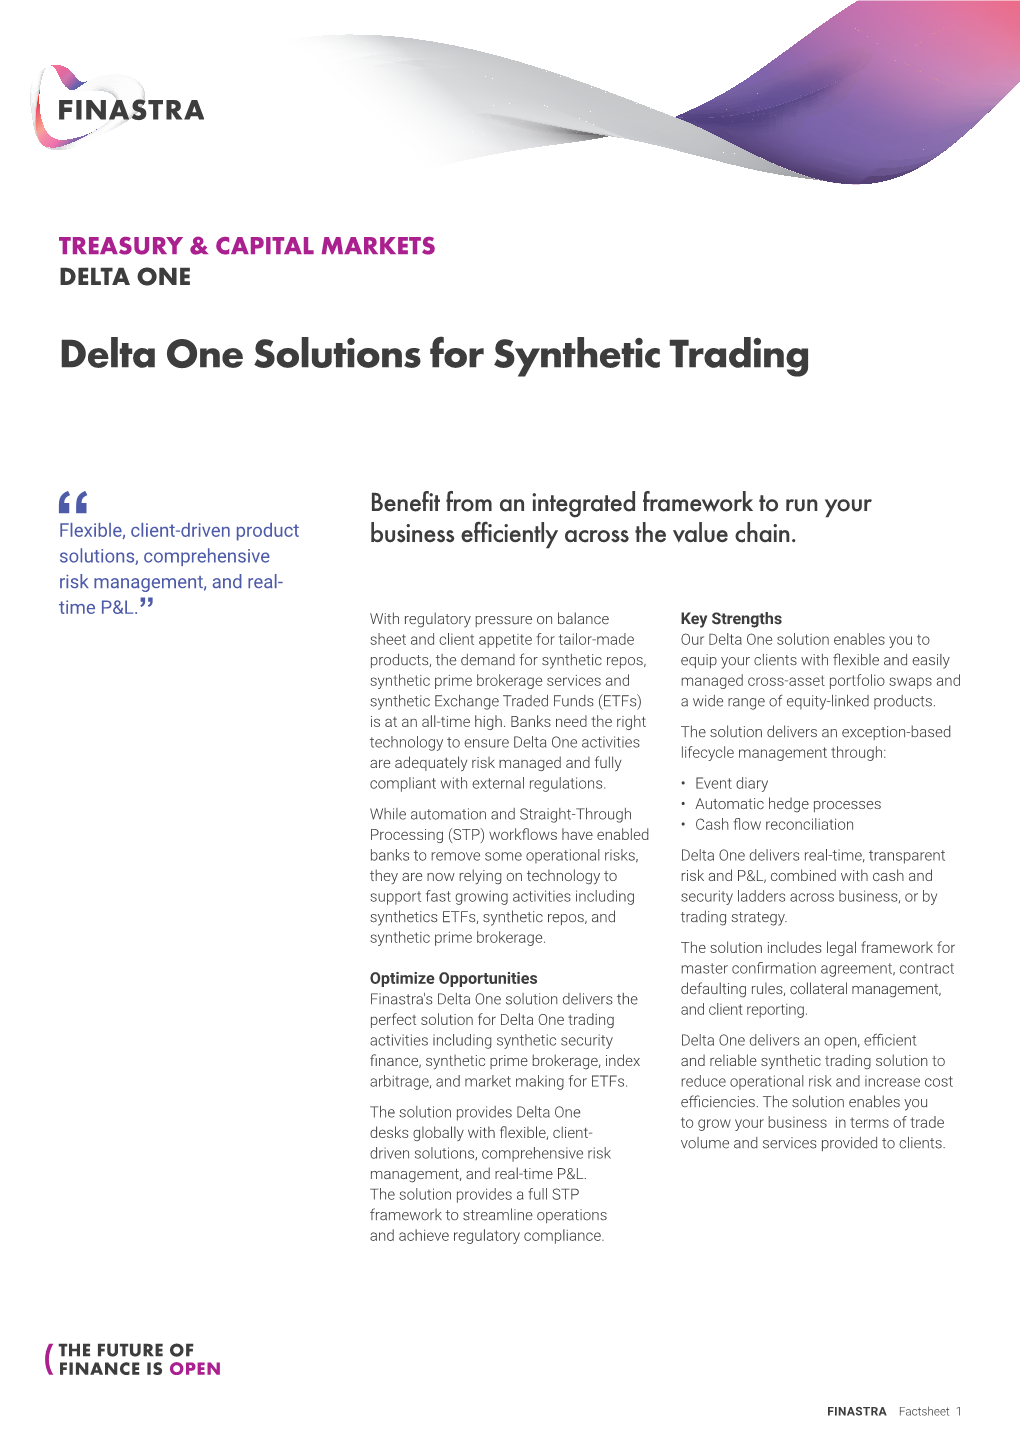 Delta One Solutions for Synthetic Trading